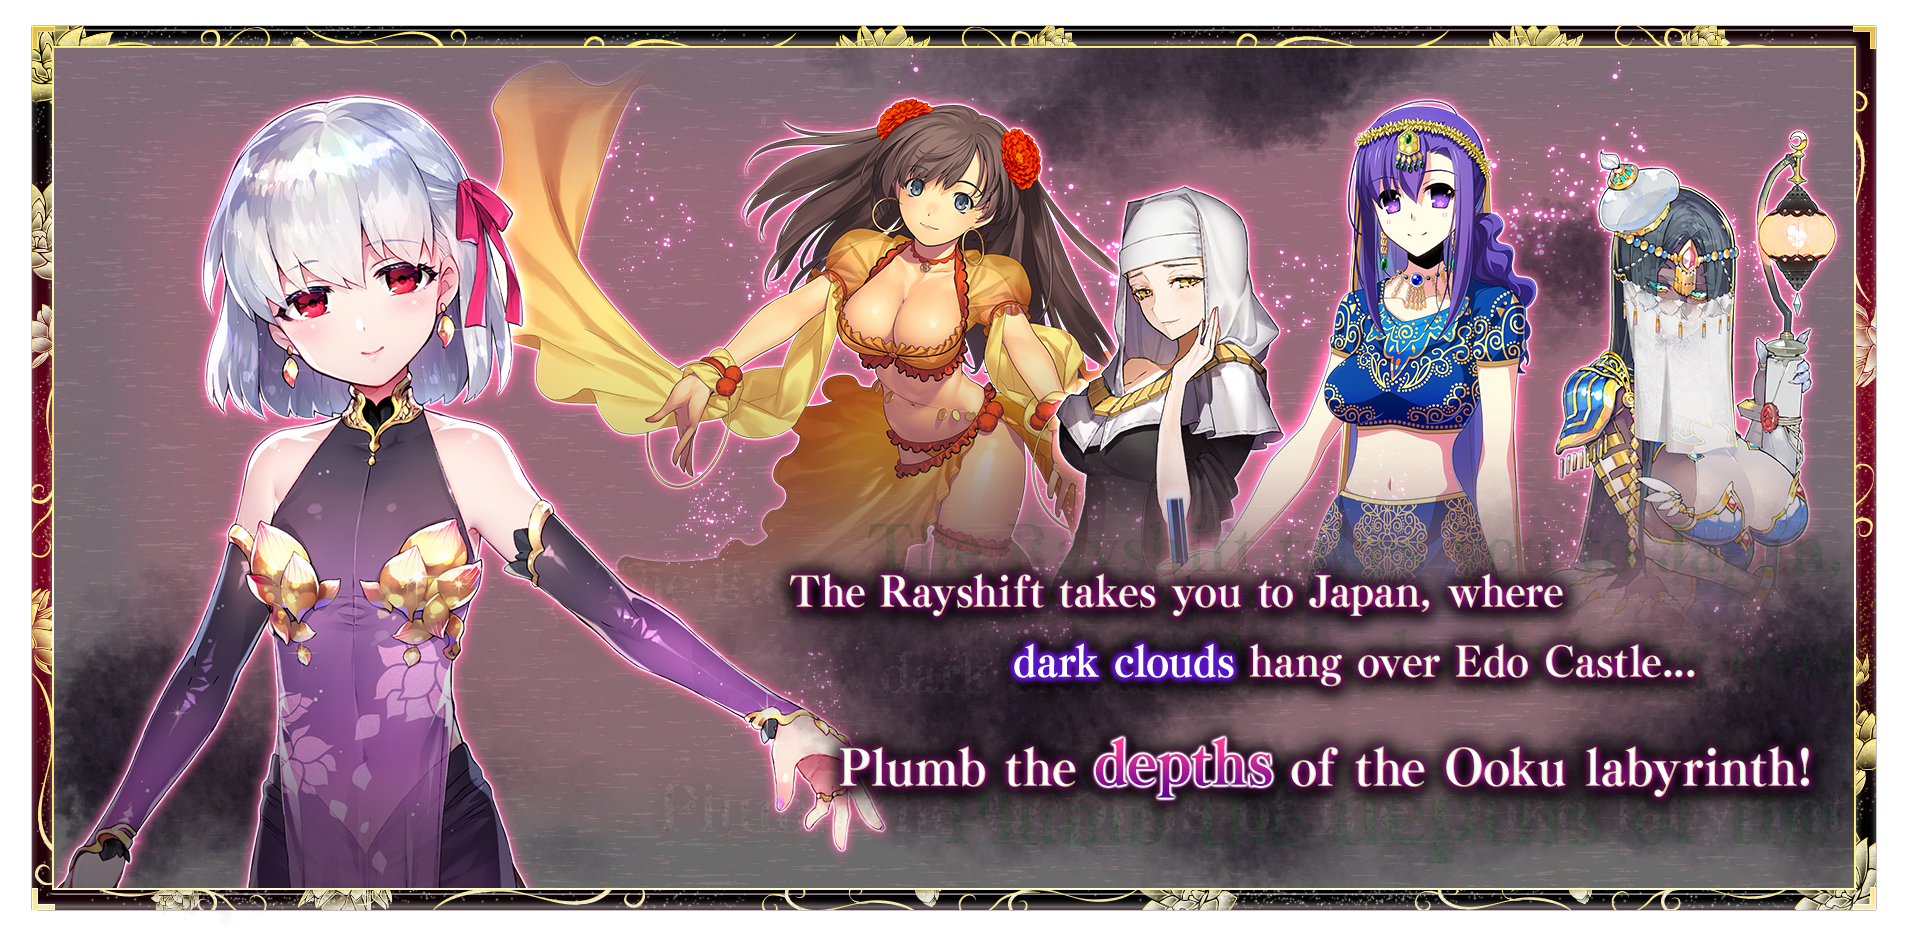 The Rayshift takes you to Japan, where dark clouds hang over Edo Castle... Plumb the depths of the Ooku labyrinth!